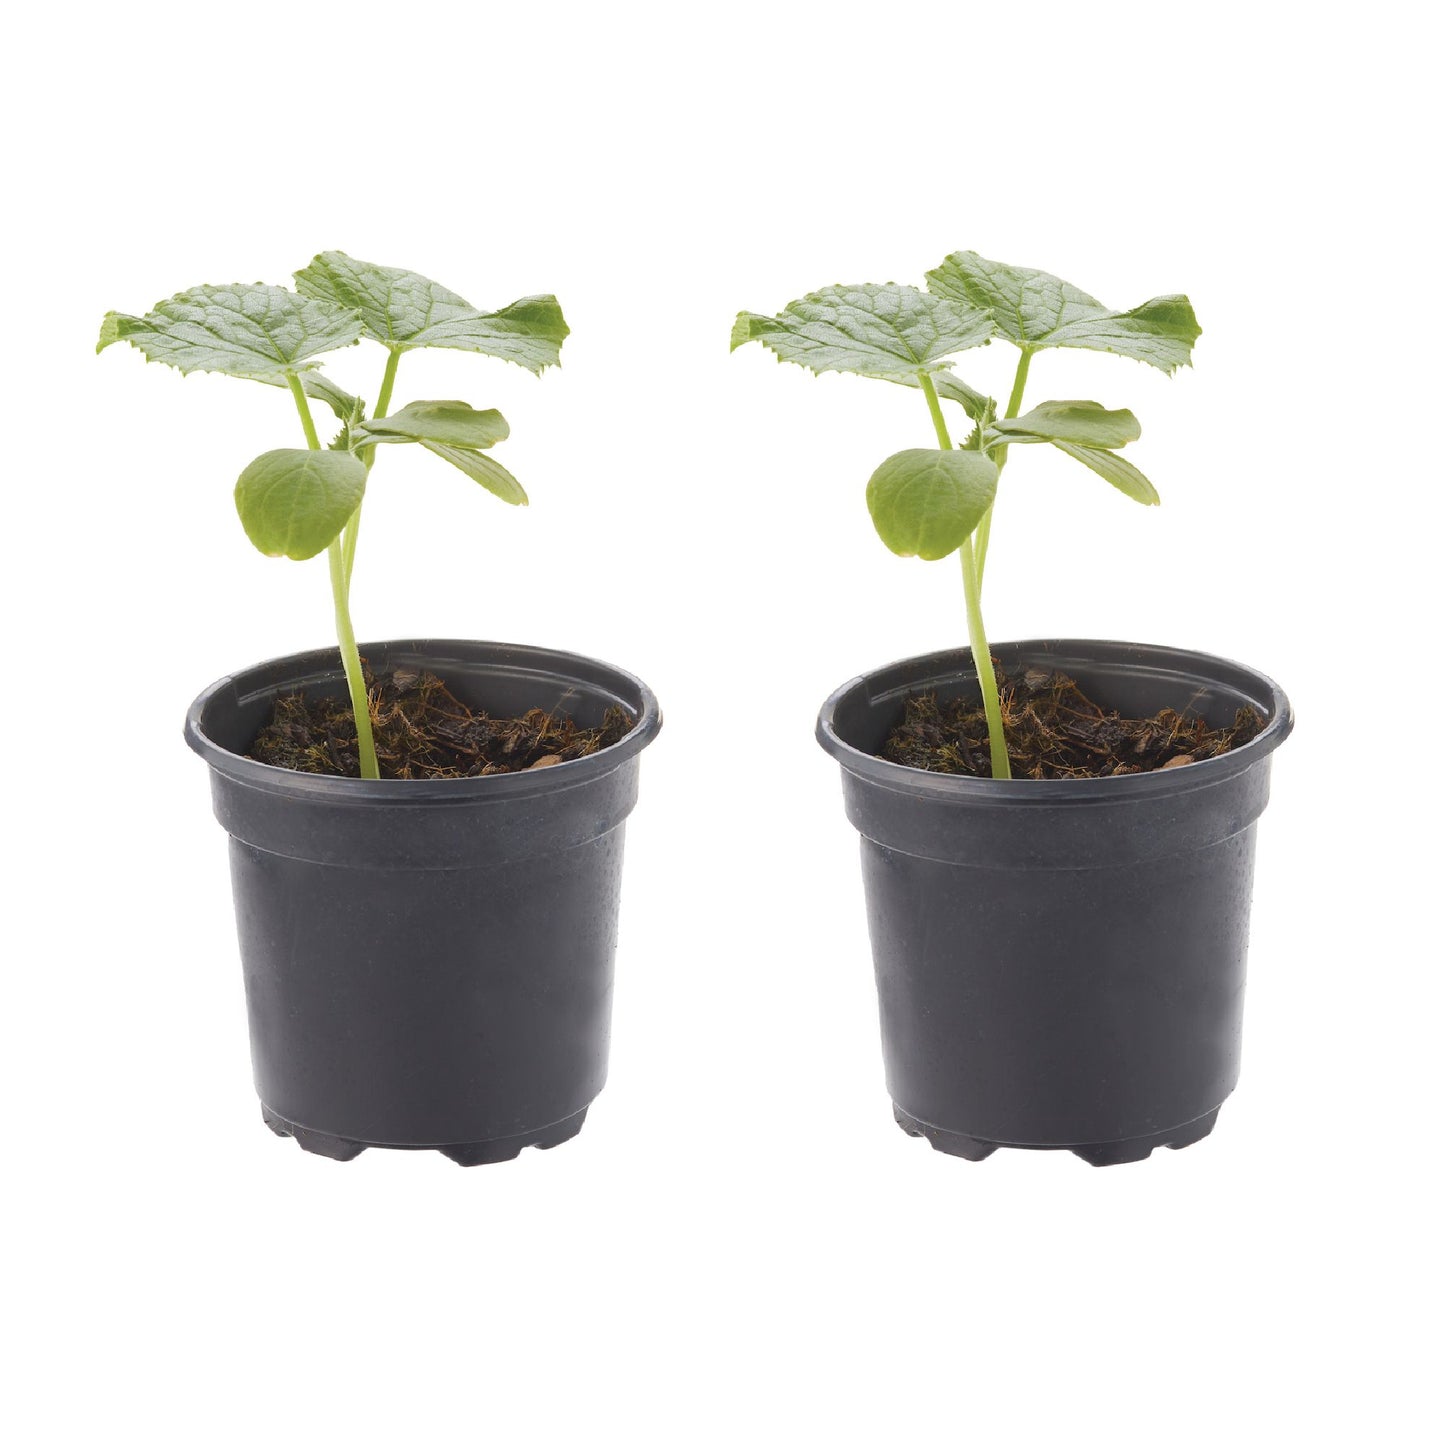 Cucumber Big Dill Plantlings Live Baby Plants 4in. Pot, 2-Pack